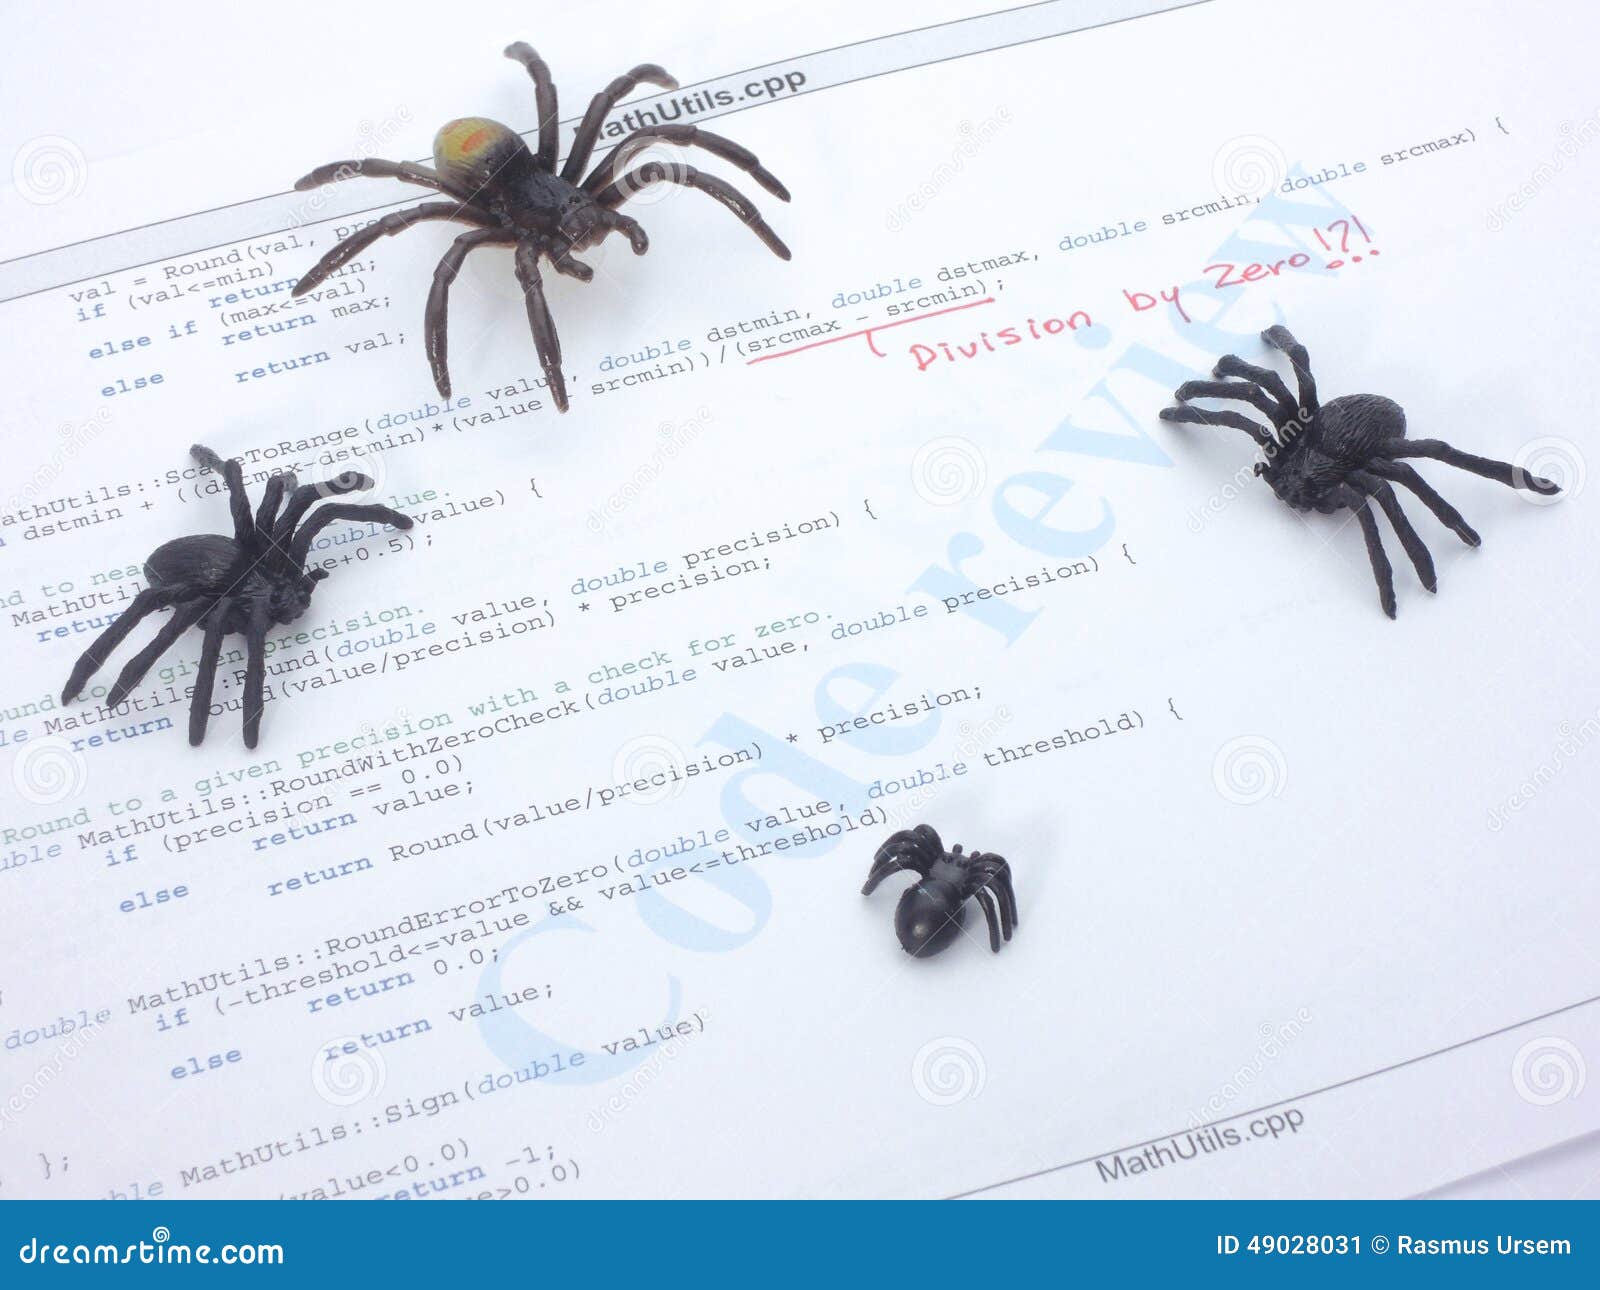 Bugs in the source code stock image. Image of development - 49028031